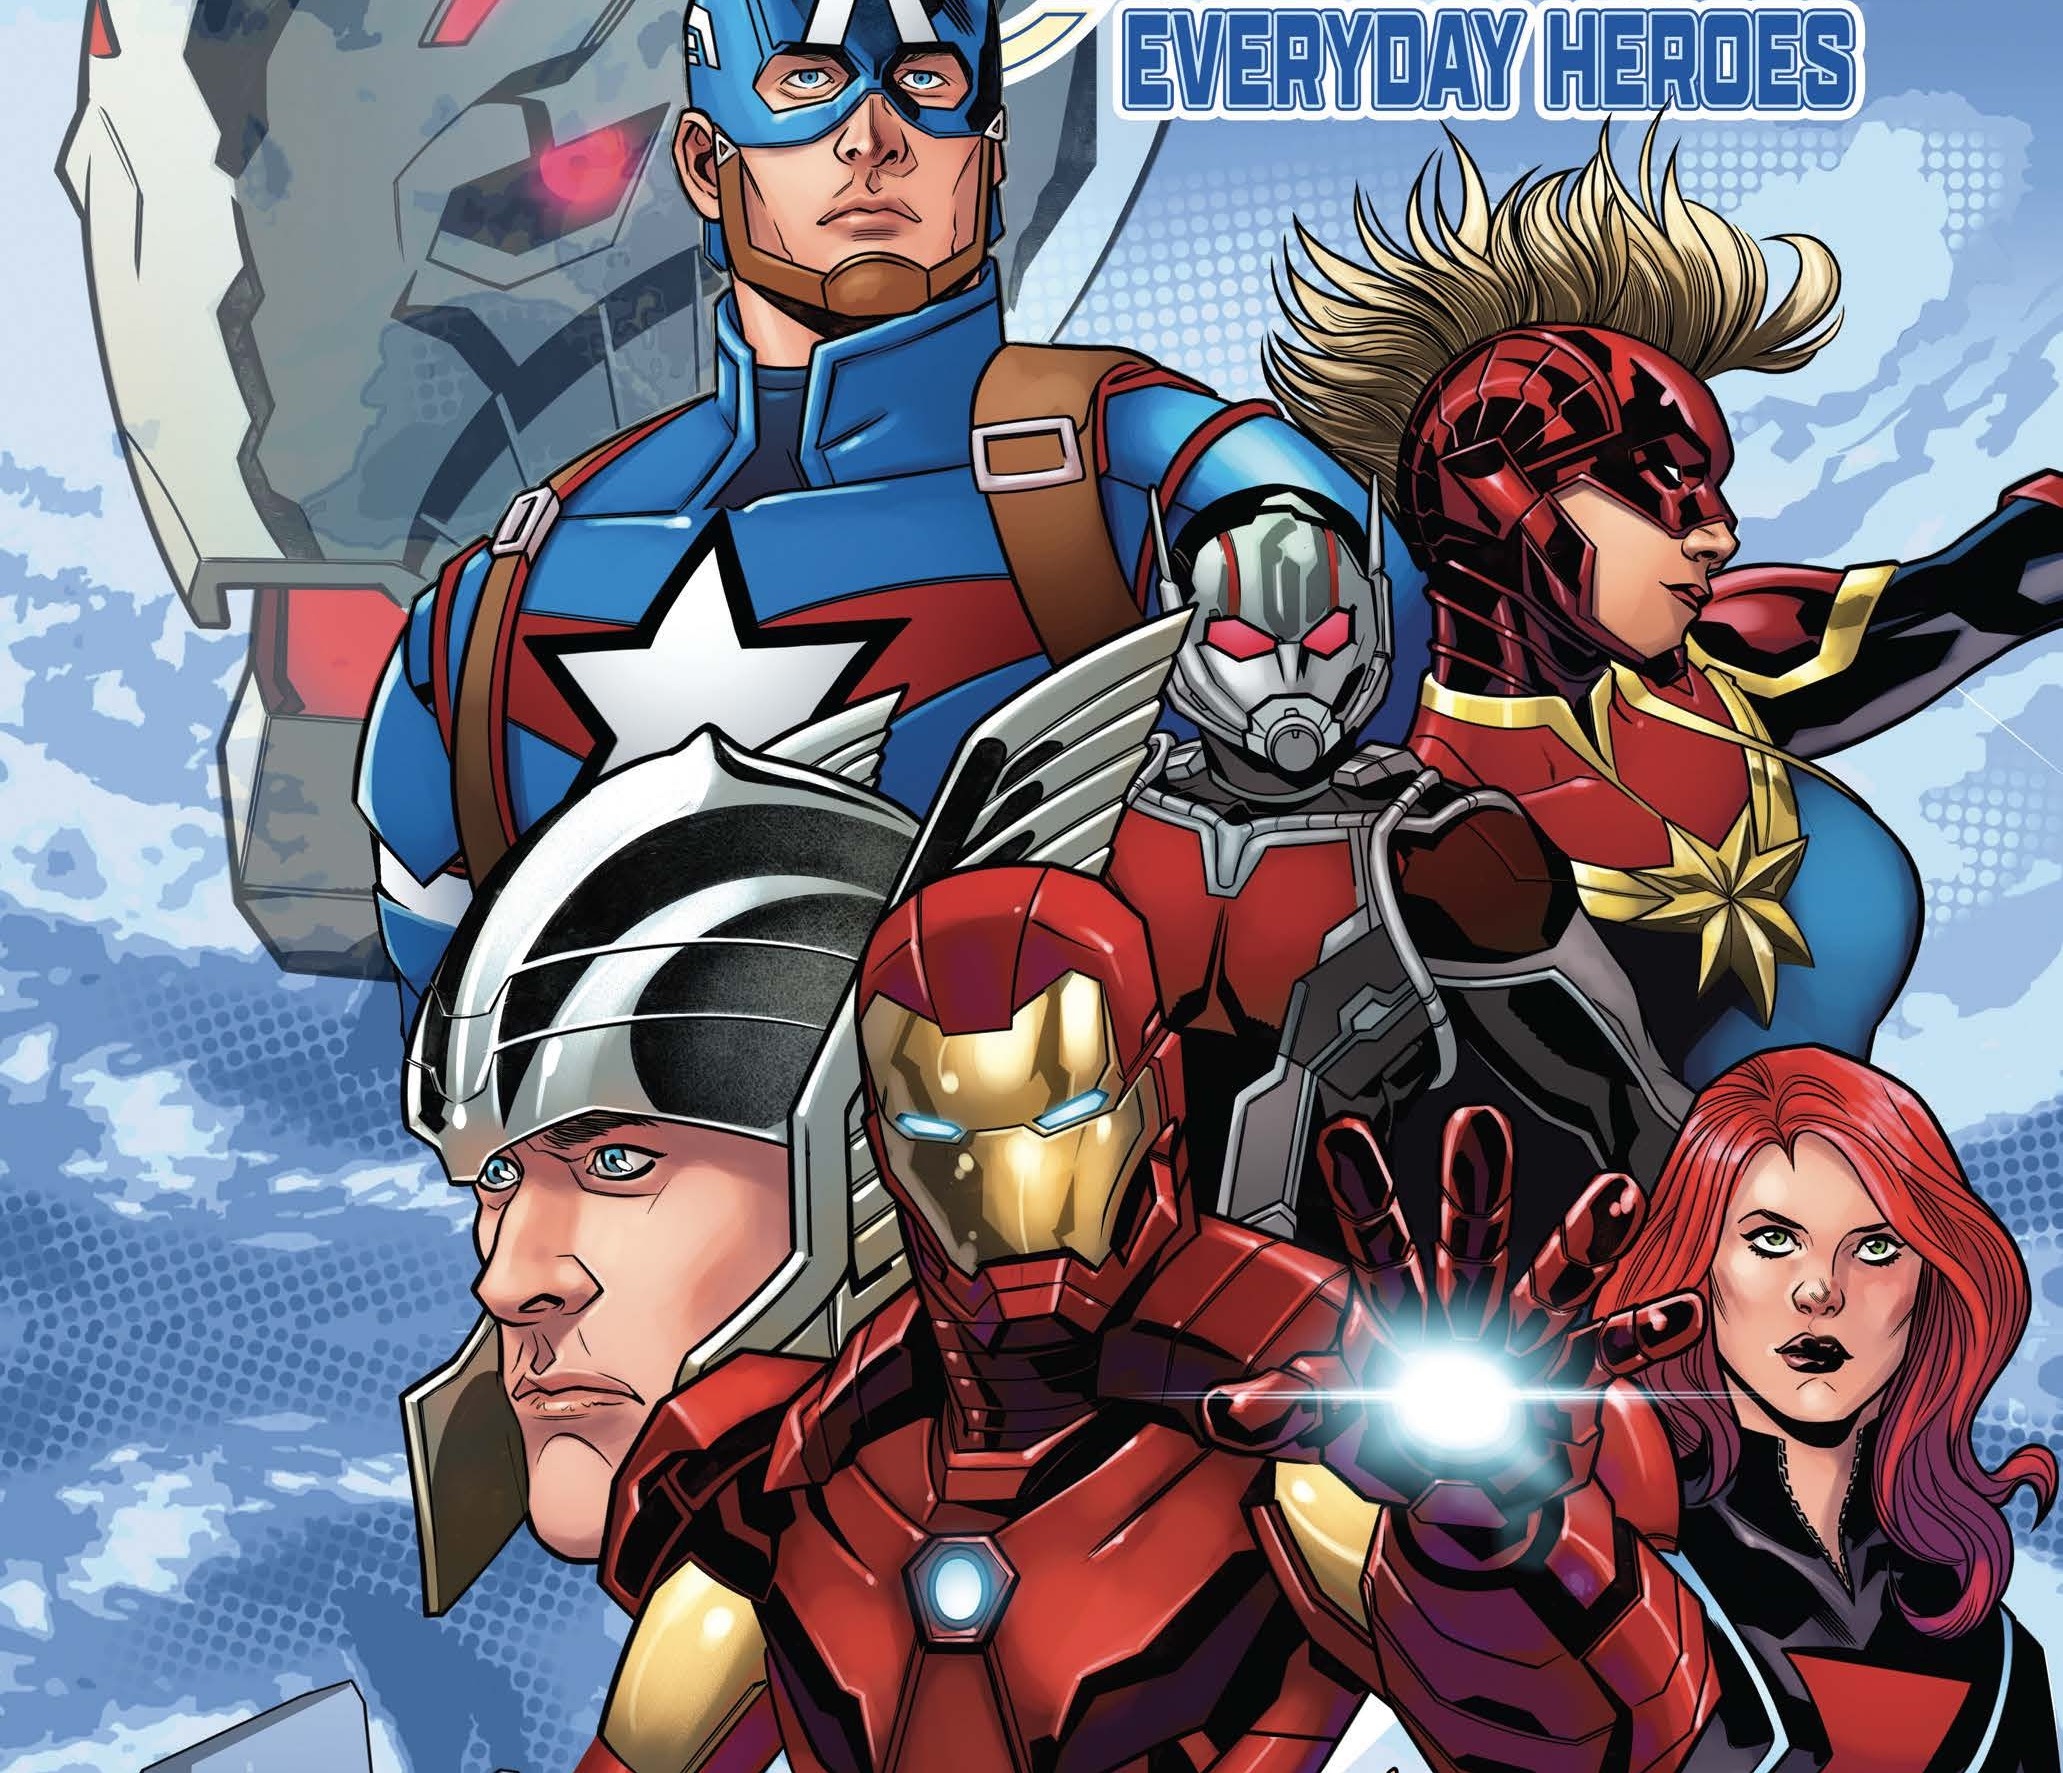 Marvel and Pfizer team up for COVID-19 vaccine awareness comic featuring the Avengers